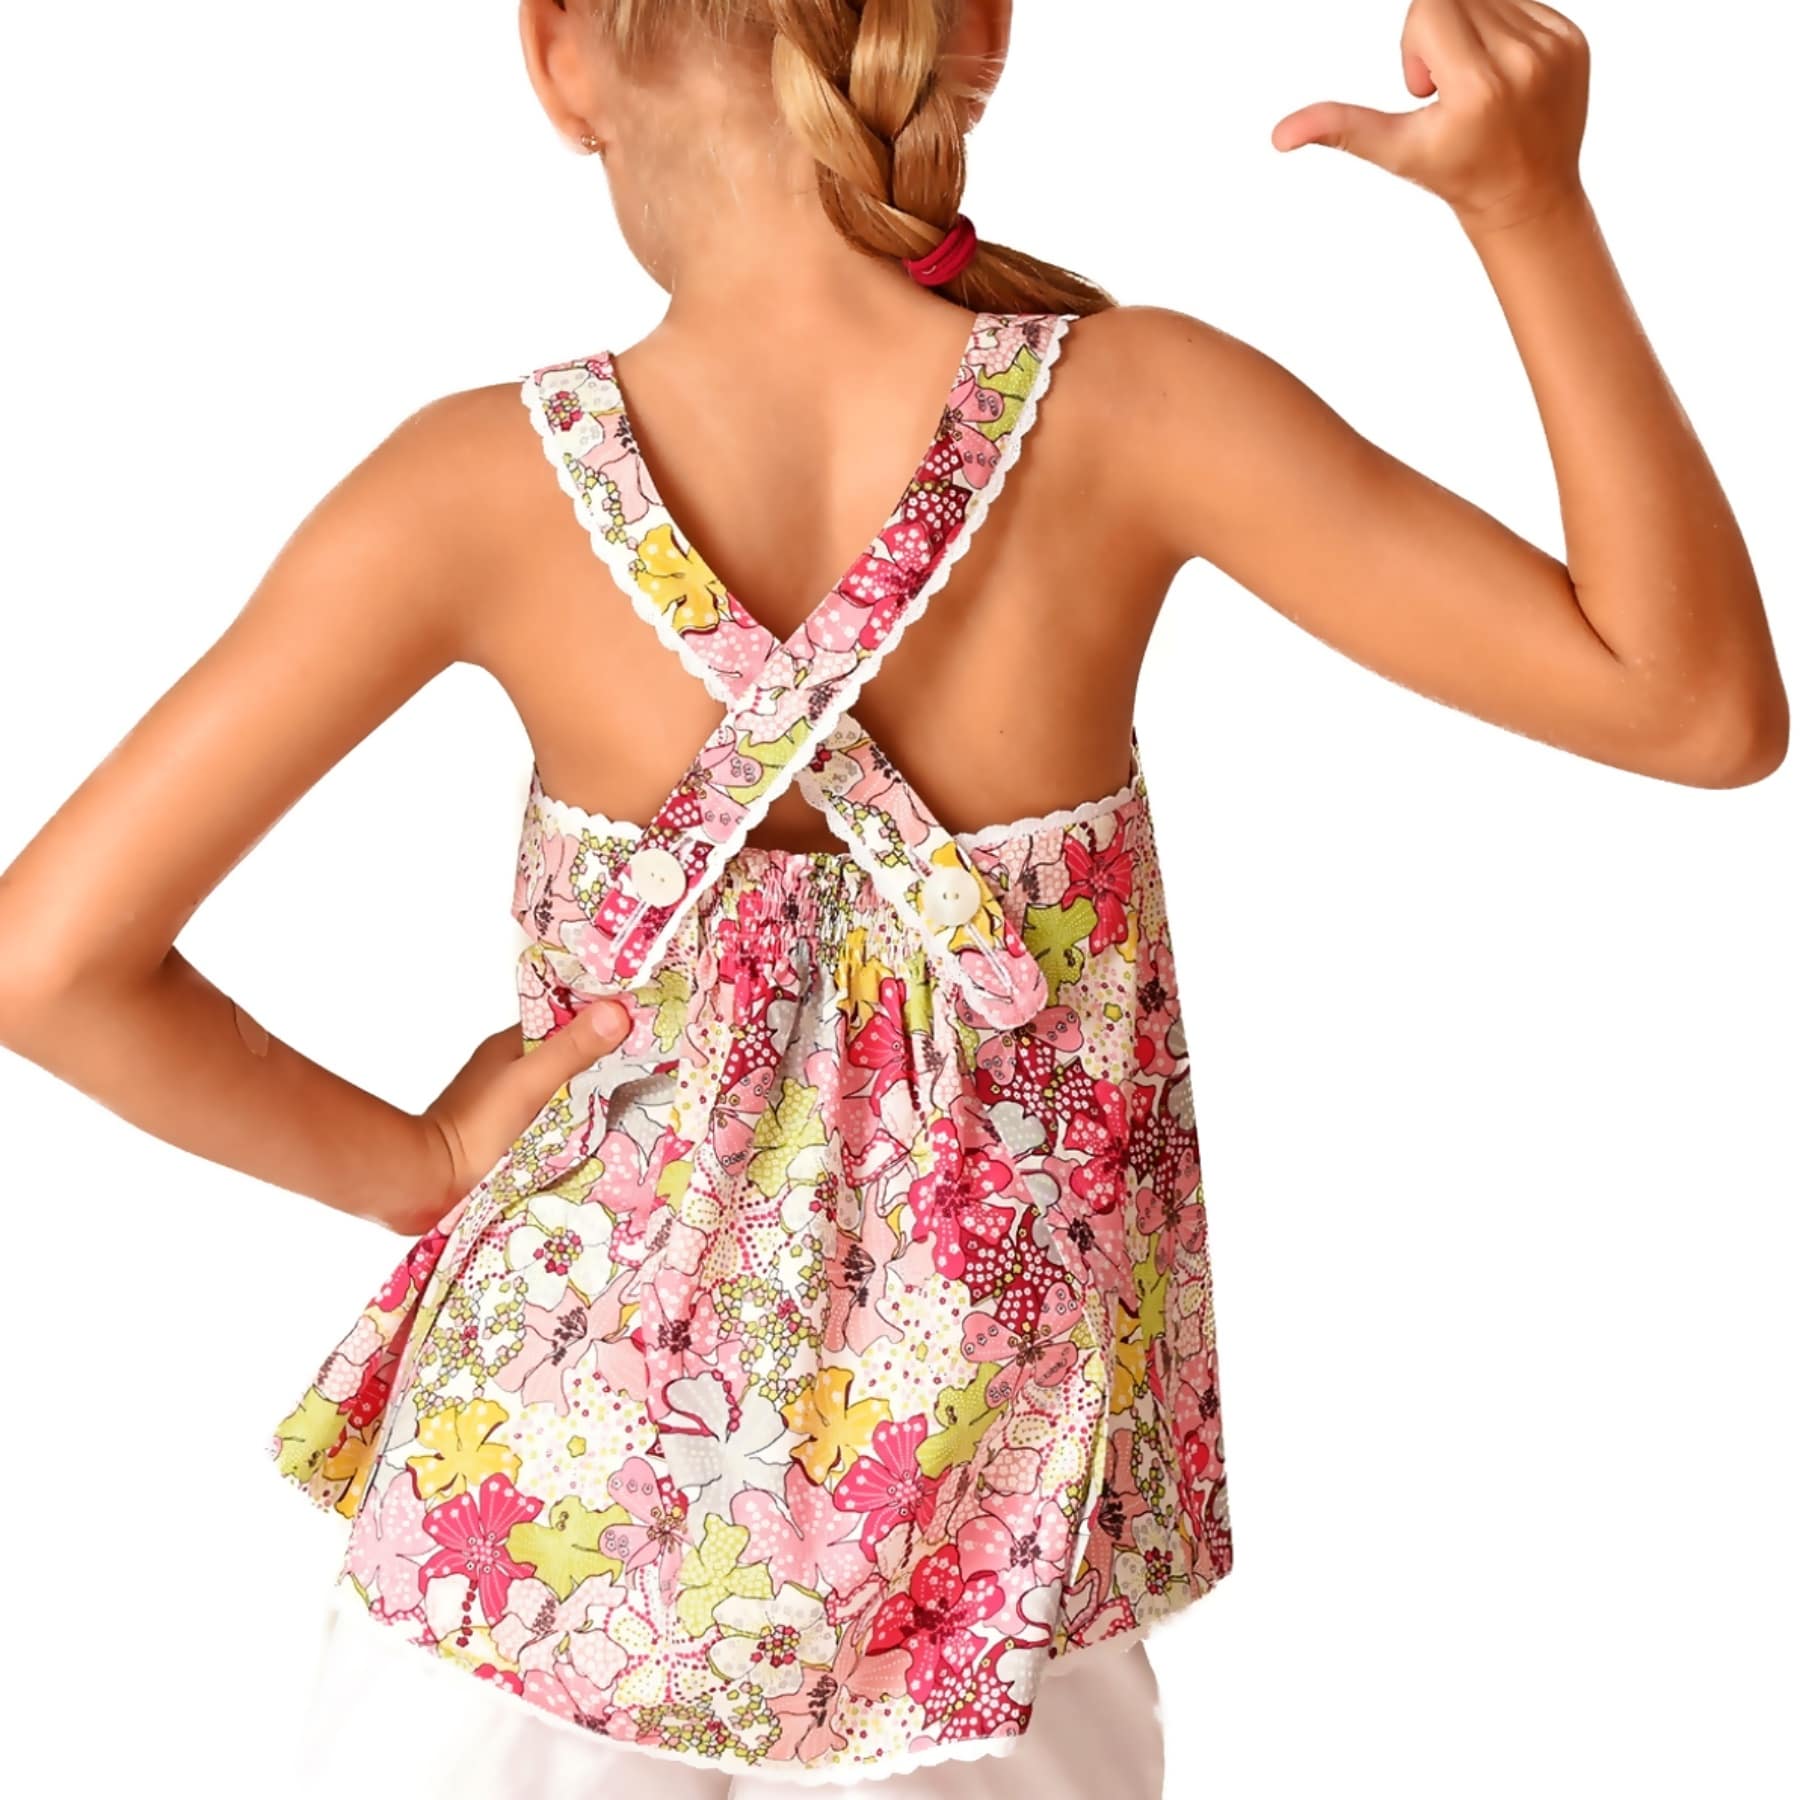 Red pink floral blouse with white lace straps from the children's fashion brand LA FAUTE A VOLTAIRE